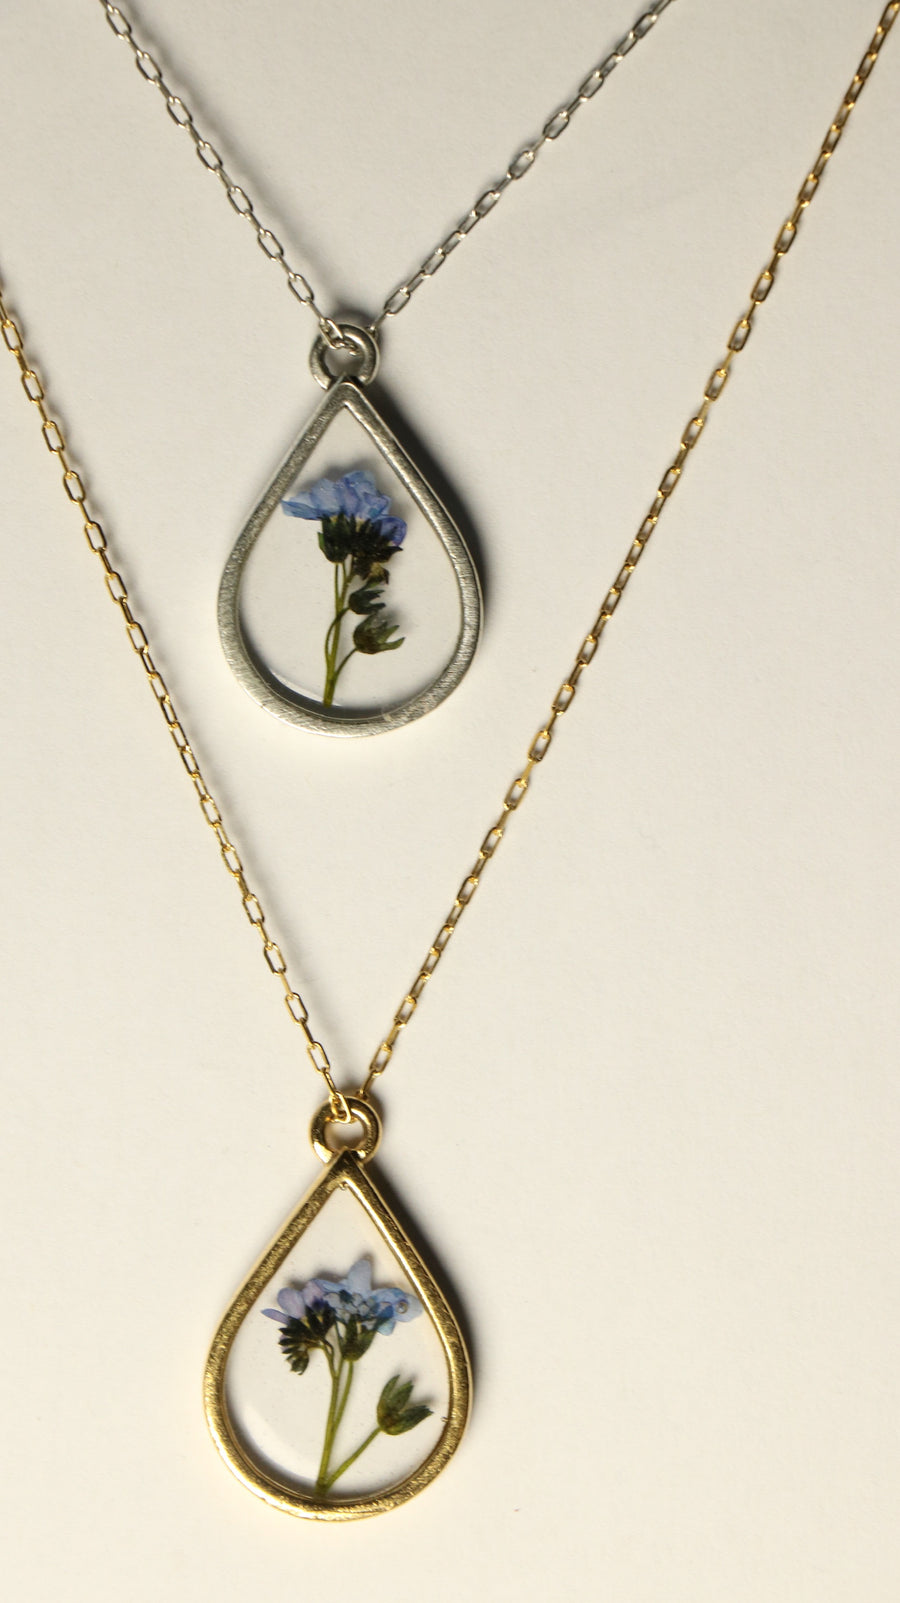 Forget-me-not Teardrop Necklace